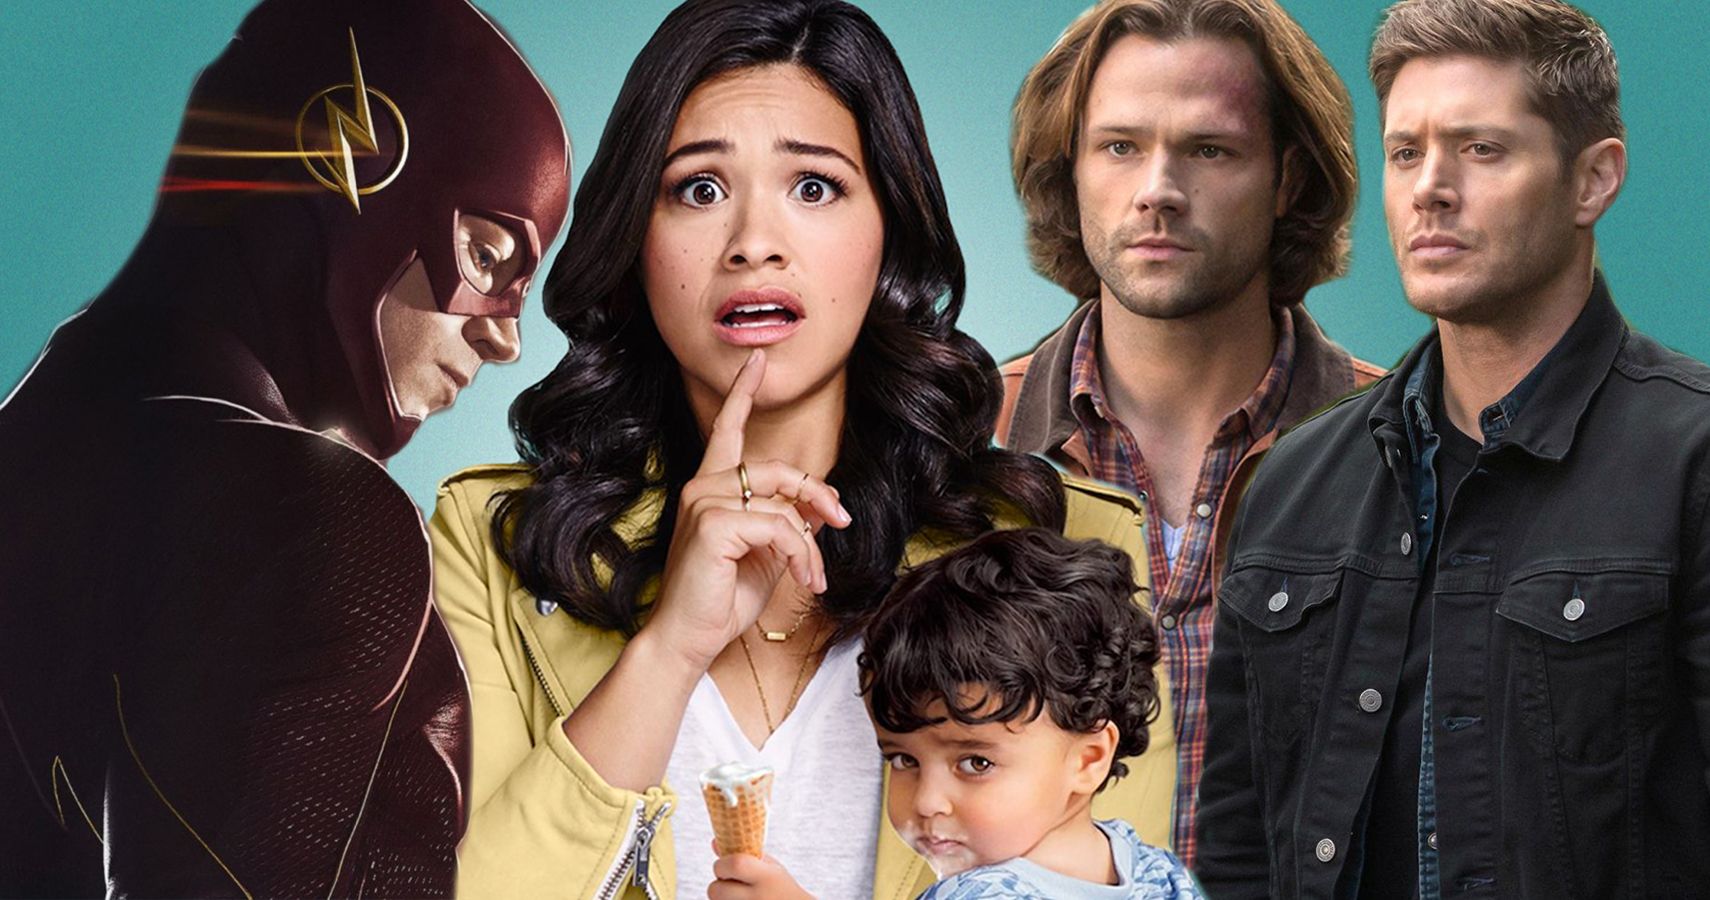 10 Best Shows From The CW Available On Netflix Ranked (According To IMDb)